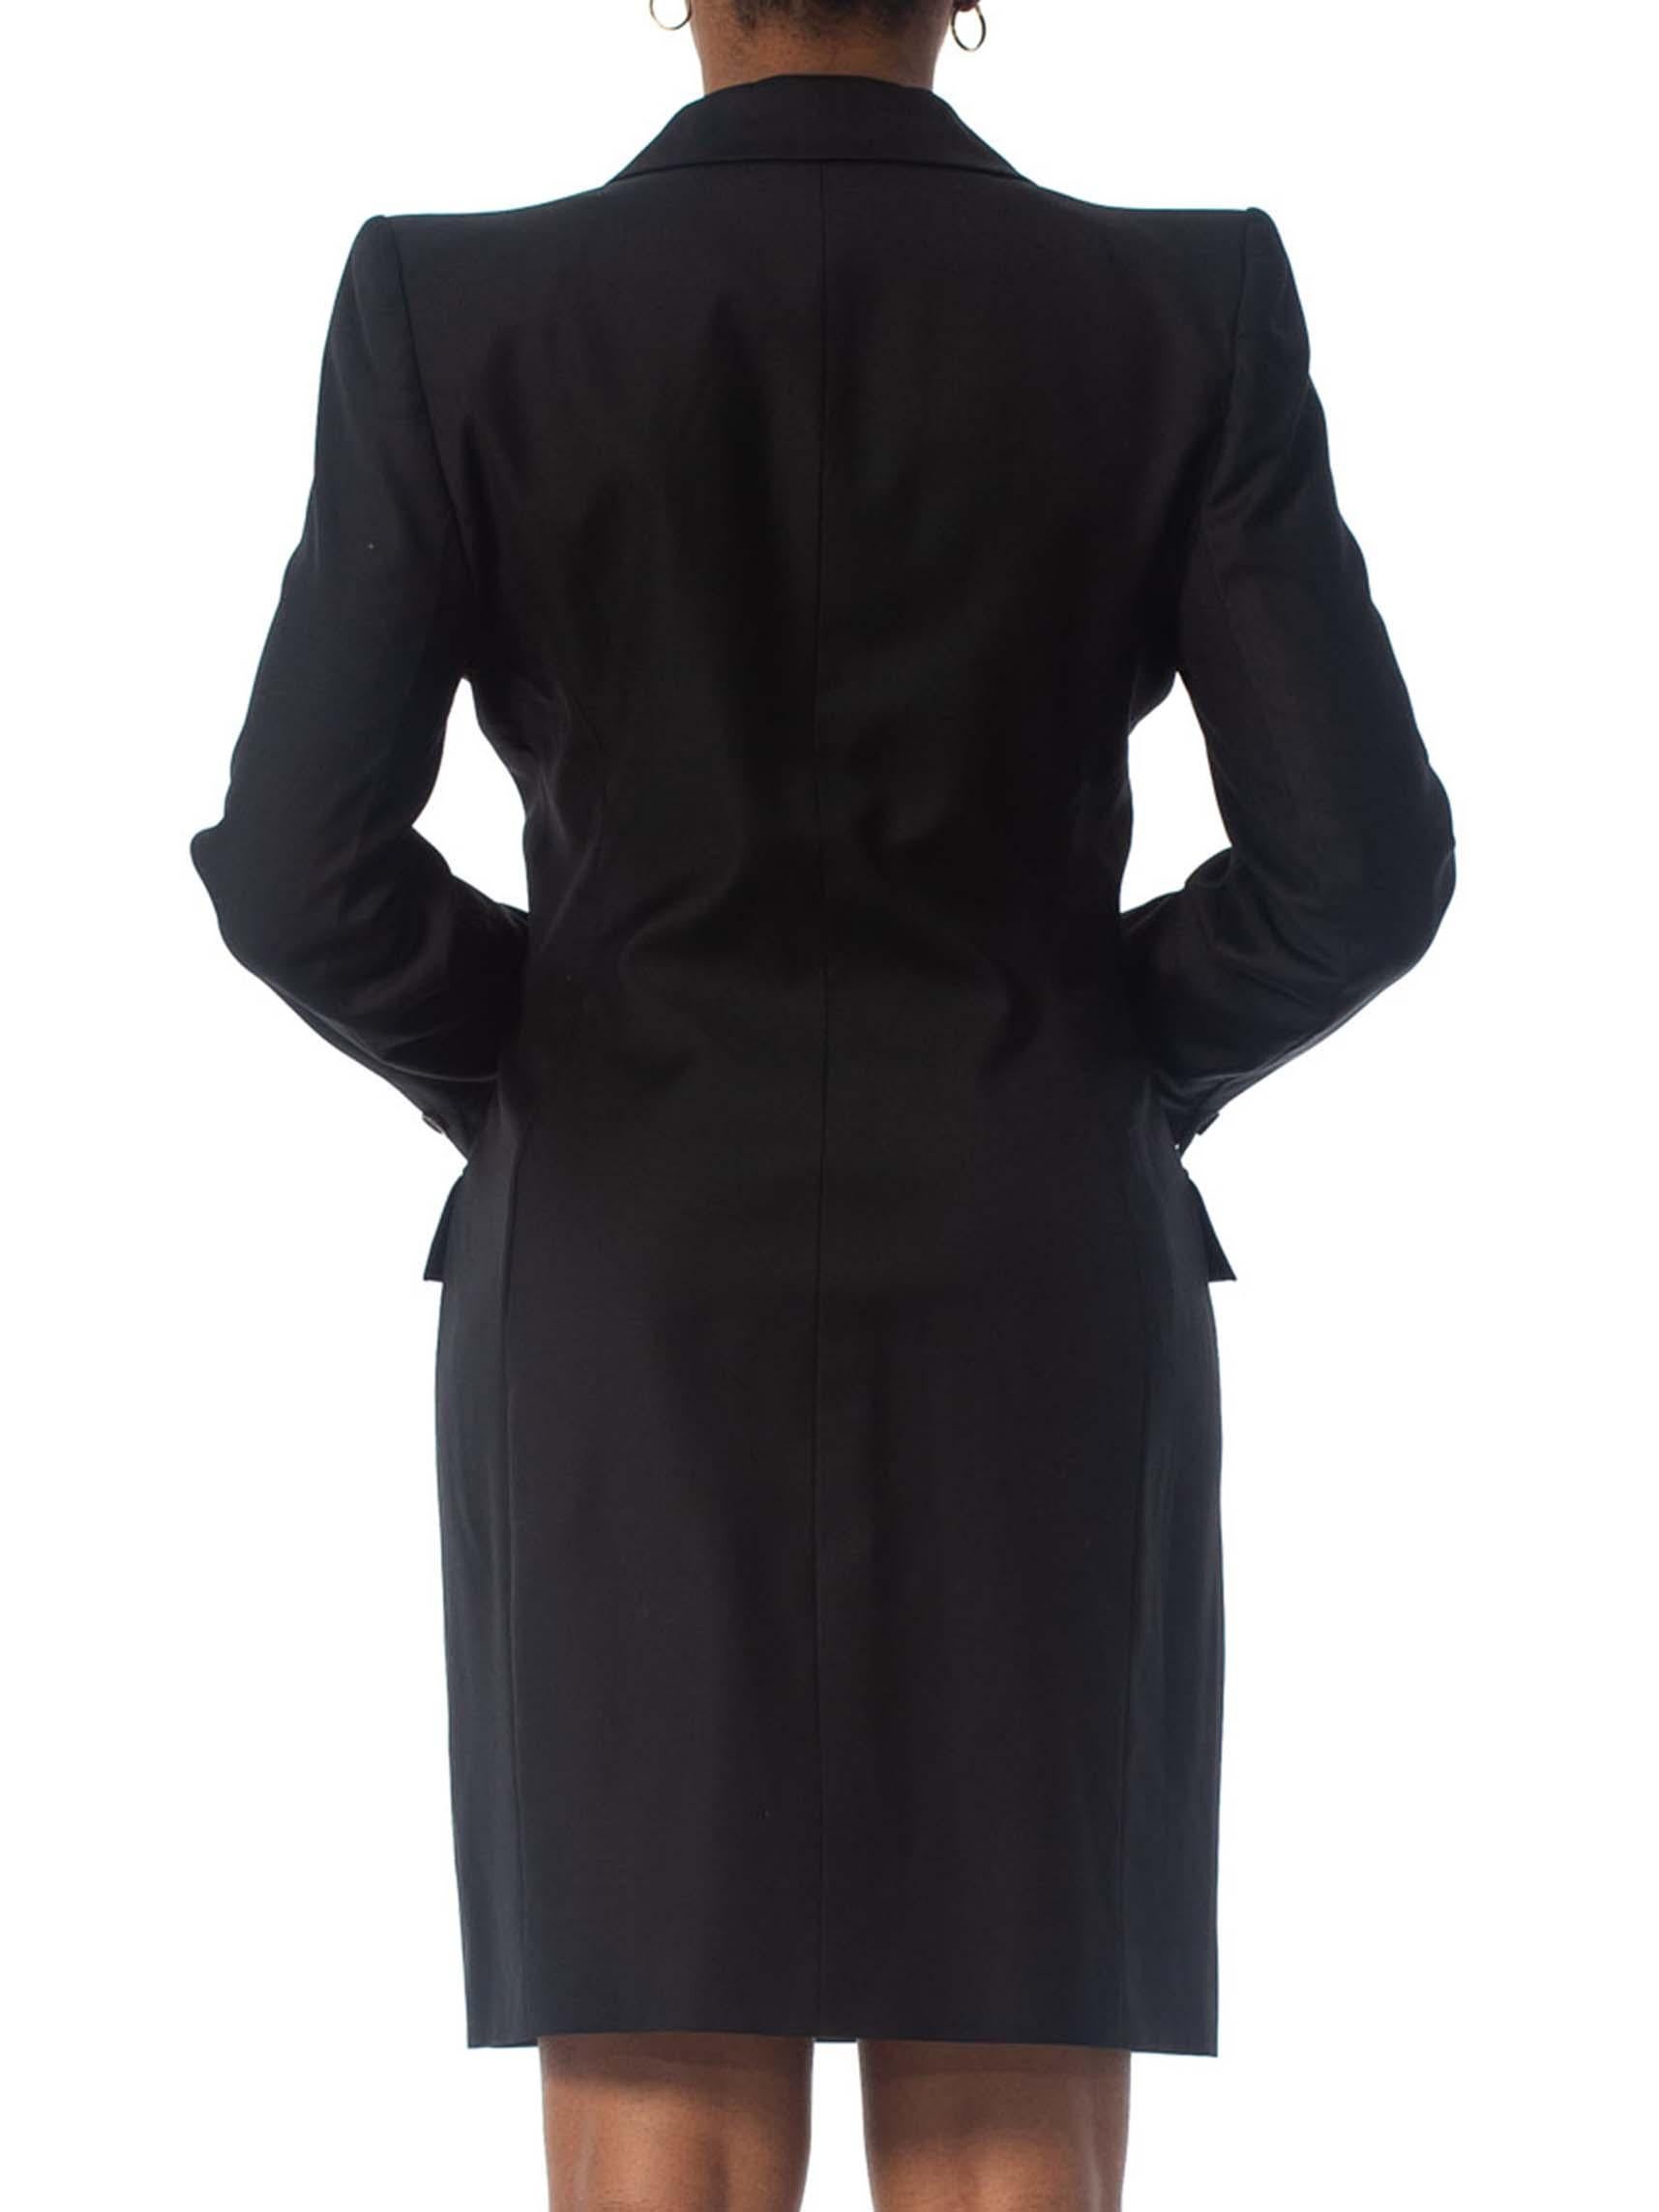 1990S ALEXANDER MCQUEEN GIVENCHY Black Wool Blazer Coat Dress With Slit & Pagod 2